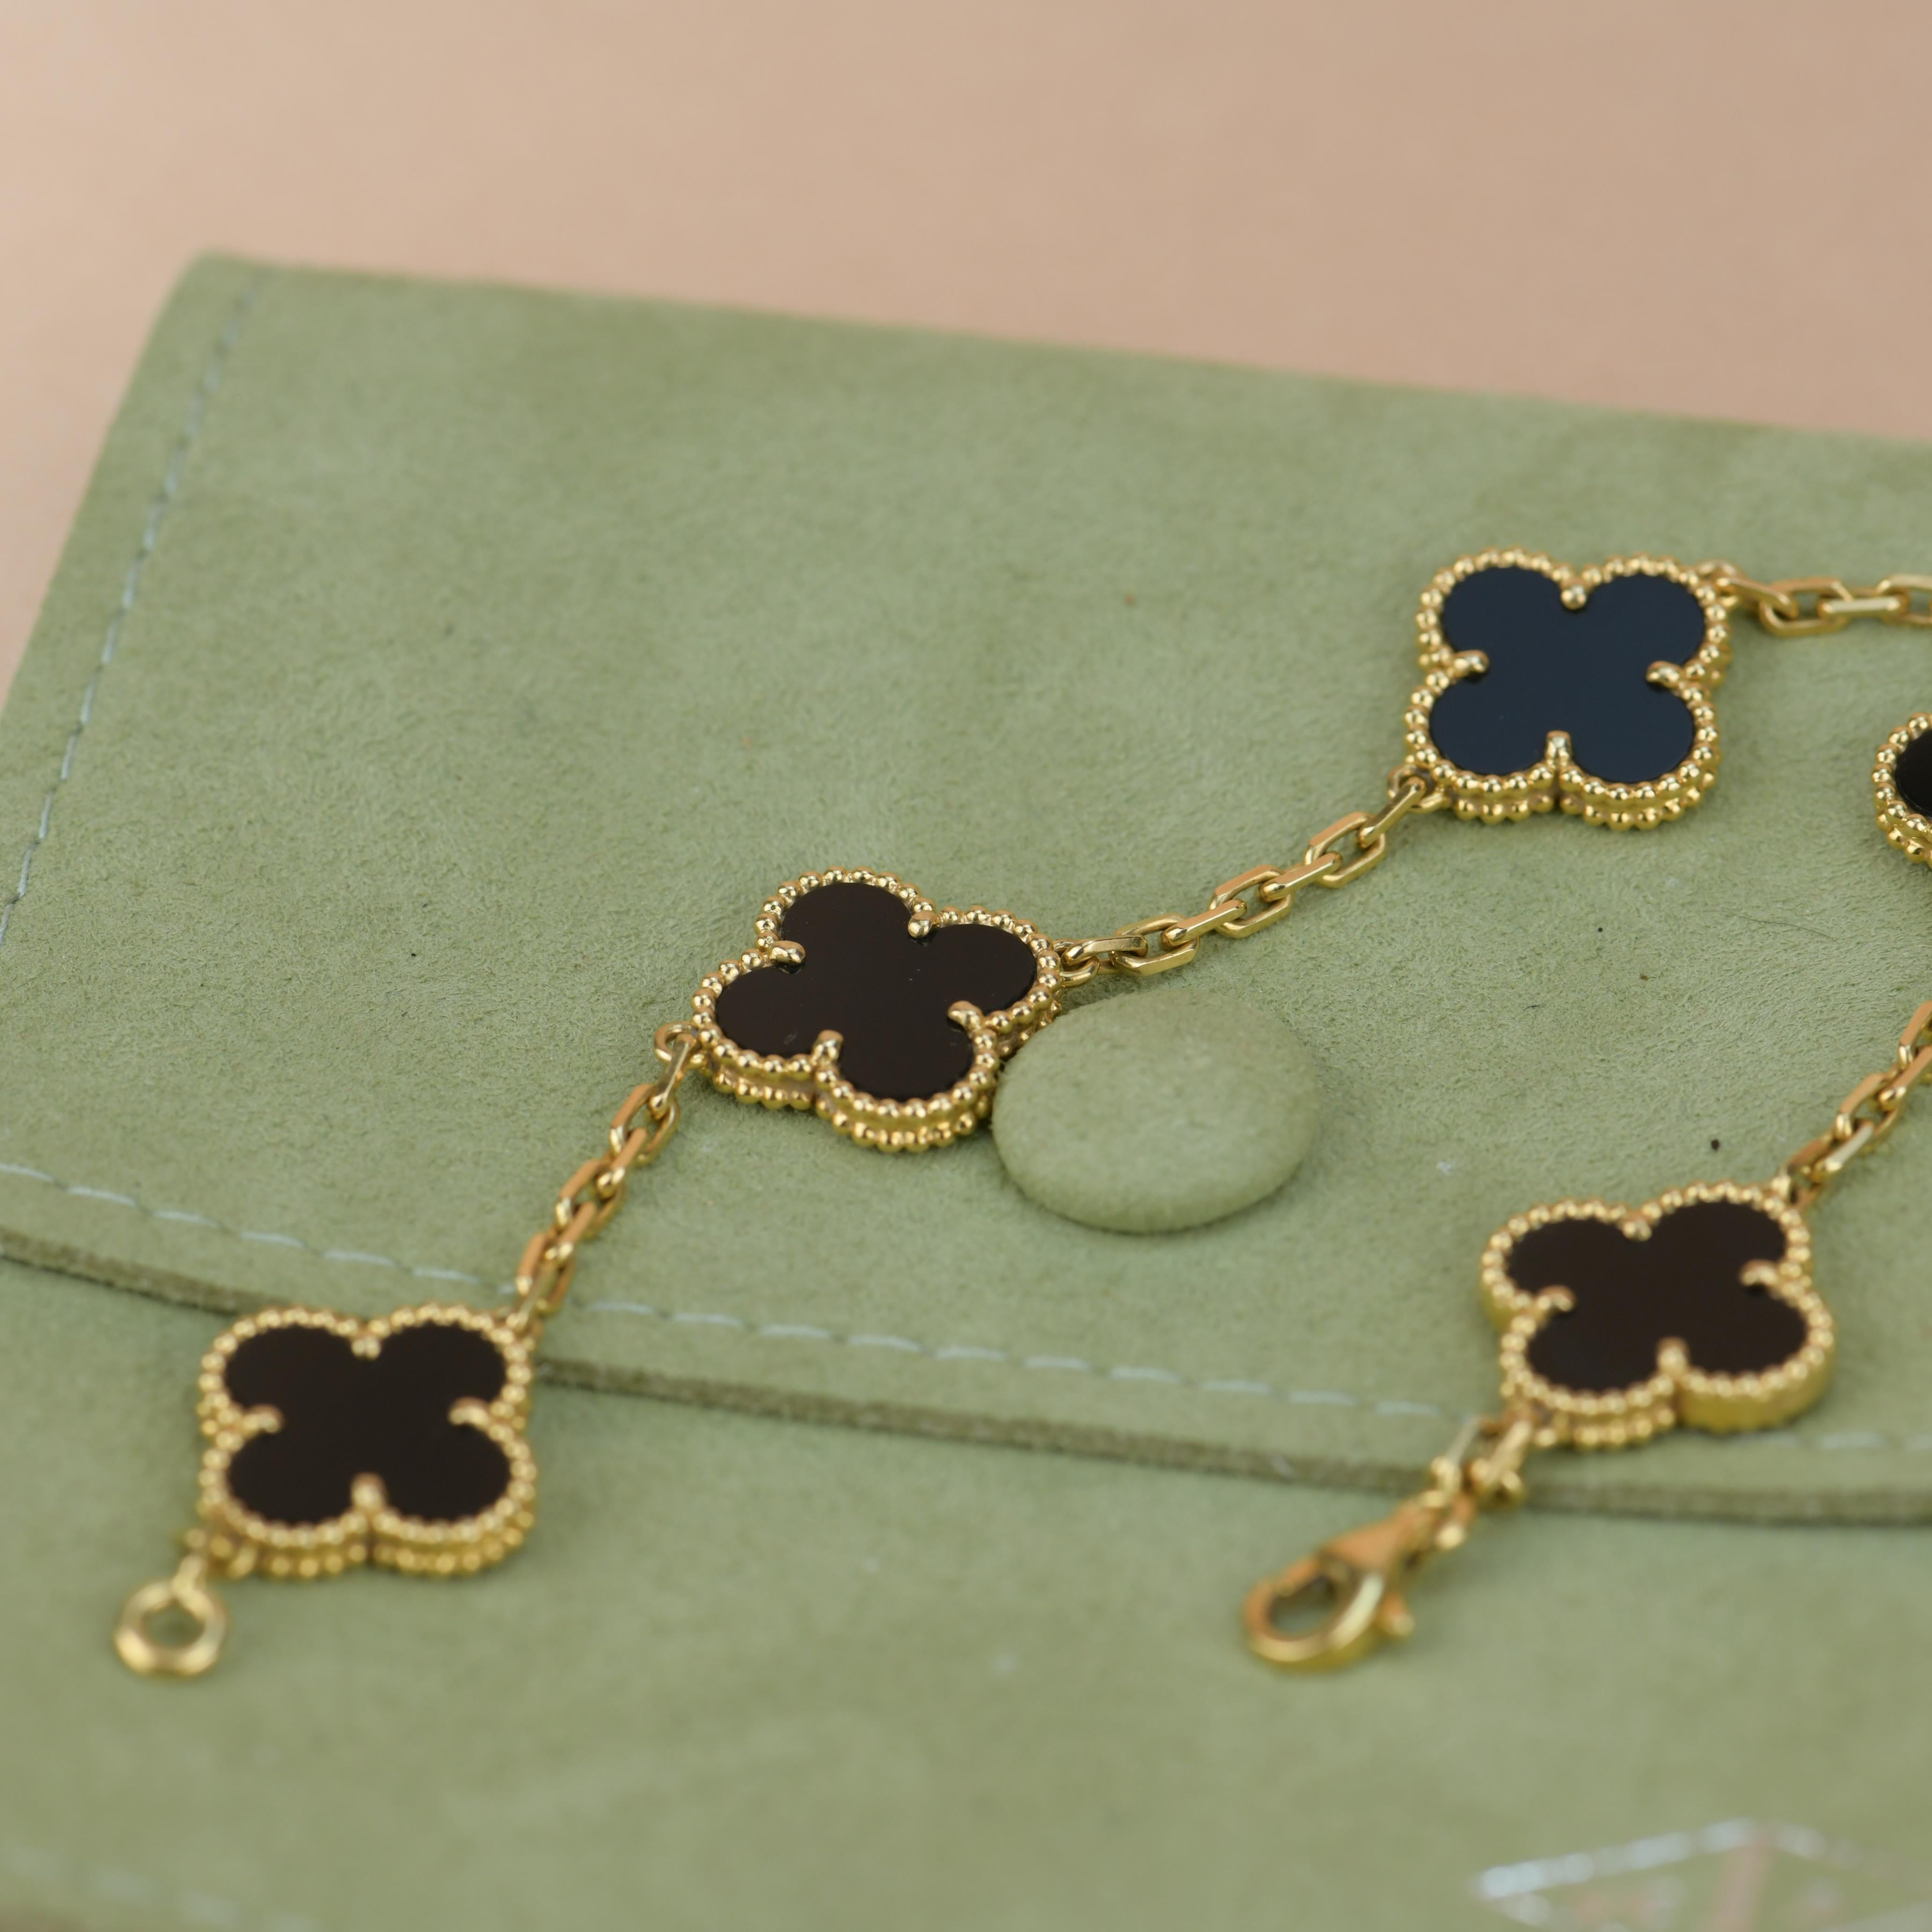 An 18k yellow gold bracelet from the Vintage Alhambra collection by Van Cleef and Arpels. The bracelet is made up of 5 iconic clover motifs, each set with a beaded edge and a black onyx inlay, set throughout the length of the chain.

Dandelion